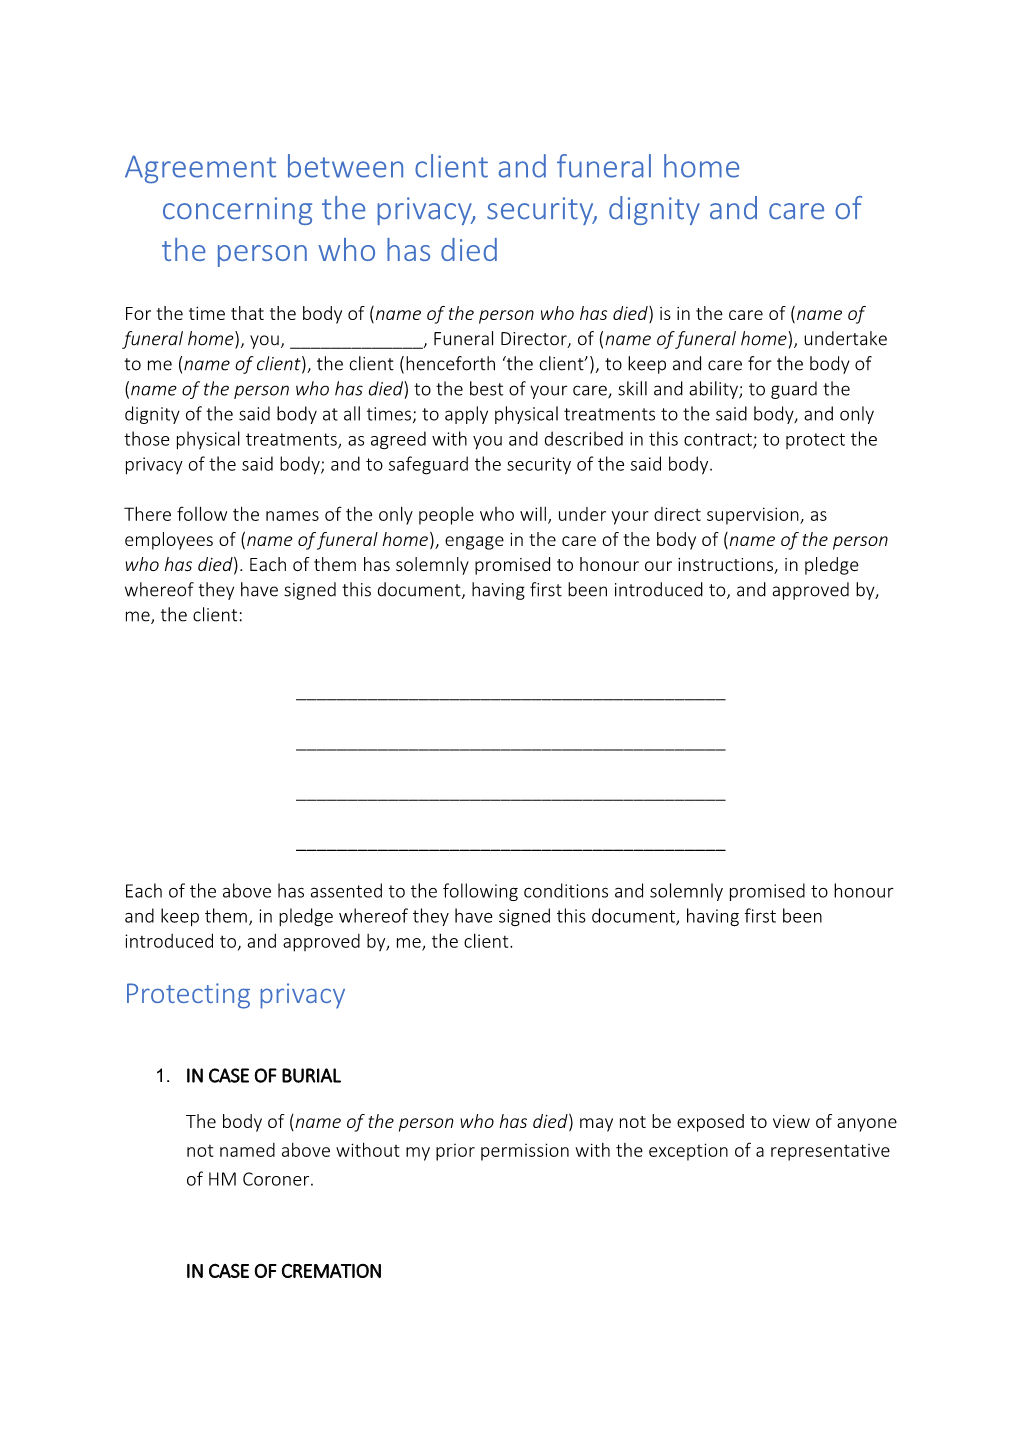 Agreement Between Client and Funeral Home Concerning the Privacy, Security, Dignity And